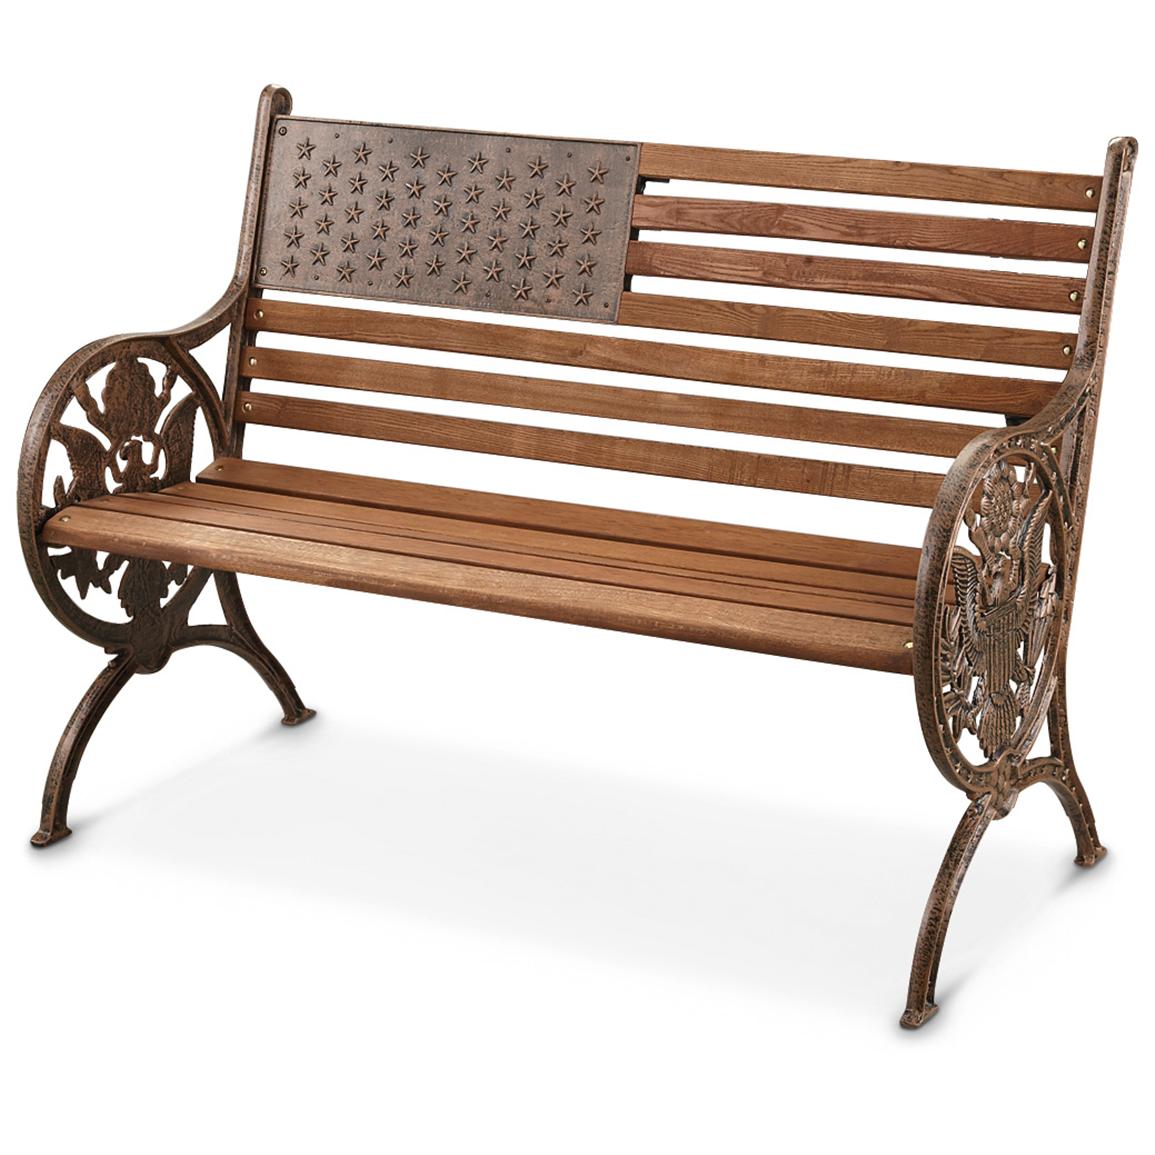 American Proud Cast Iron / Wood Park Bench - 281386, Patio Furniture at